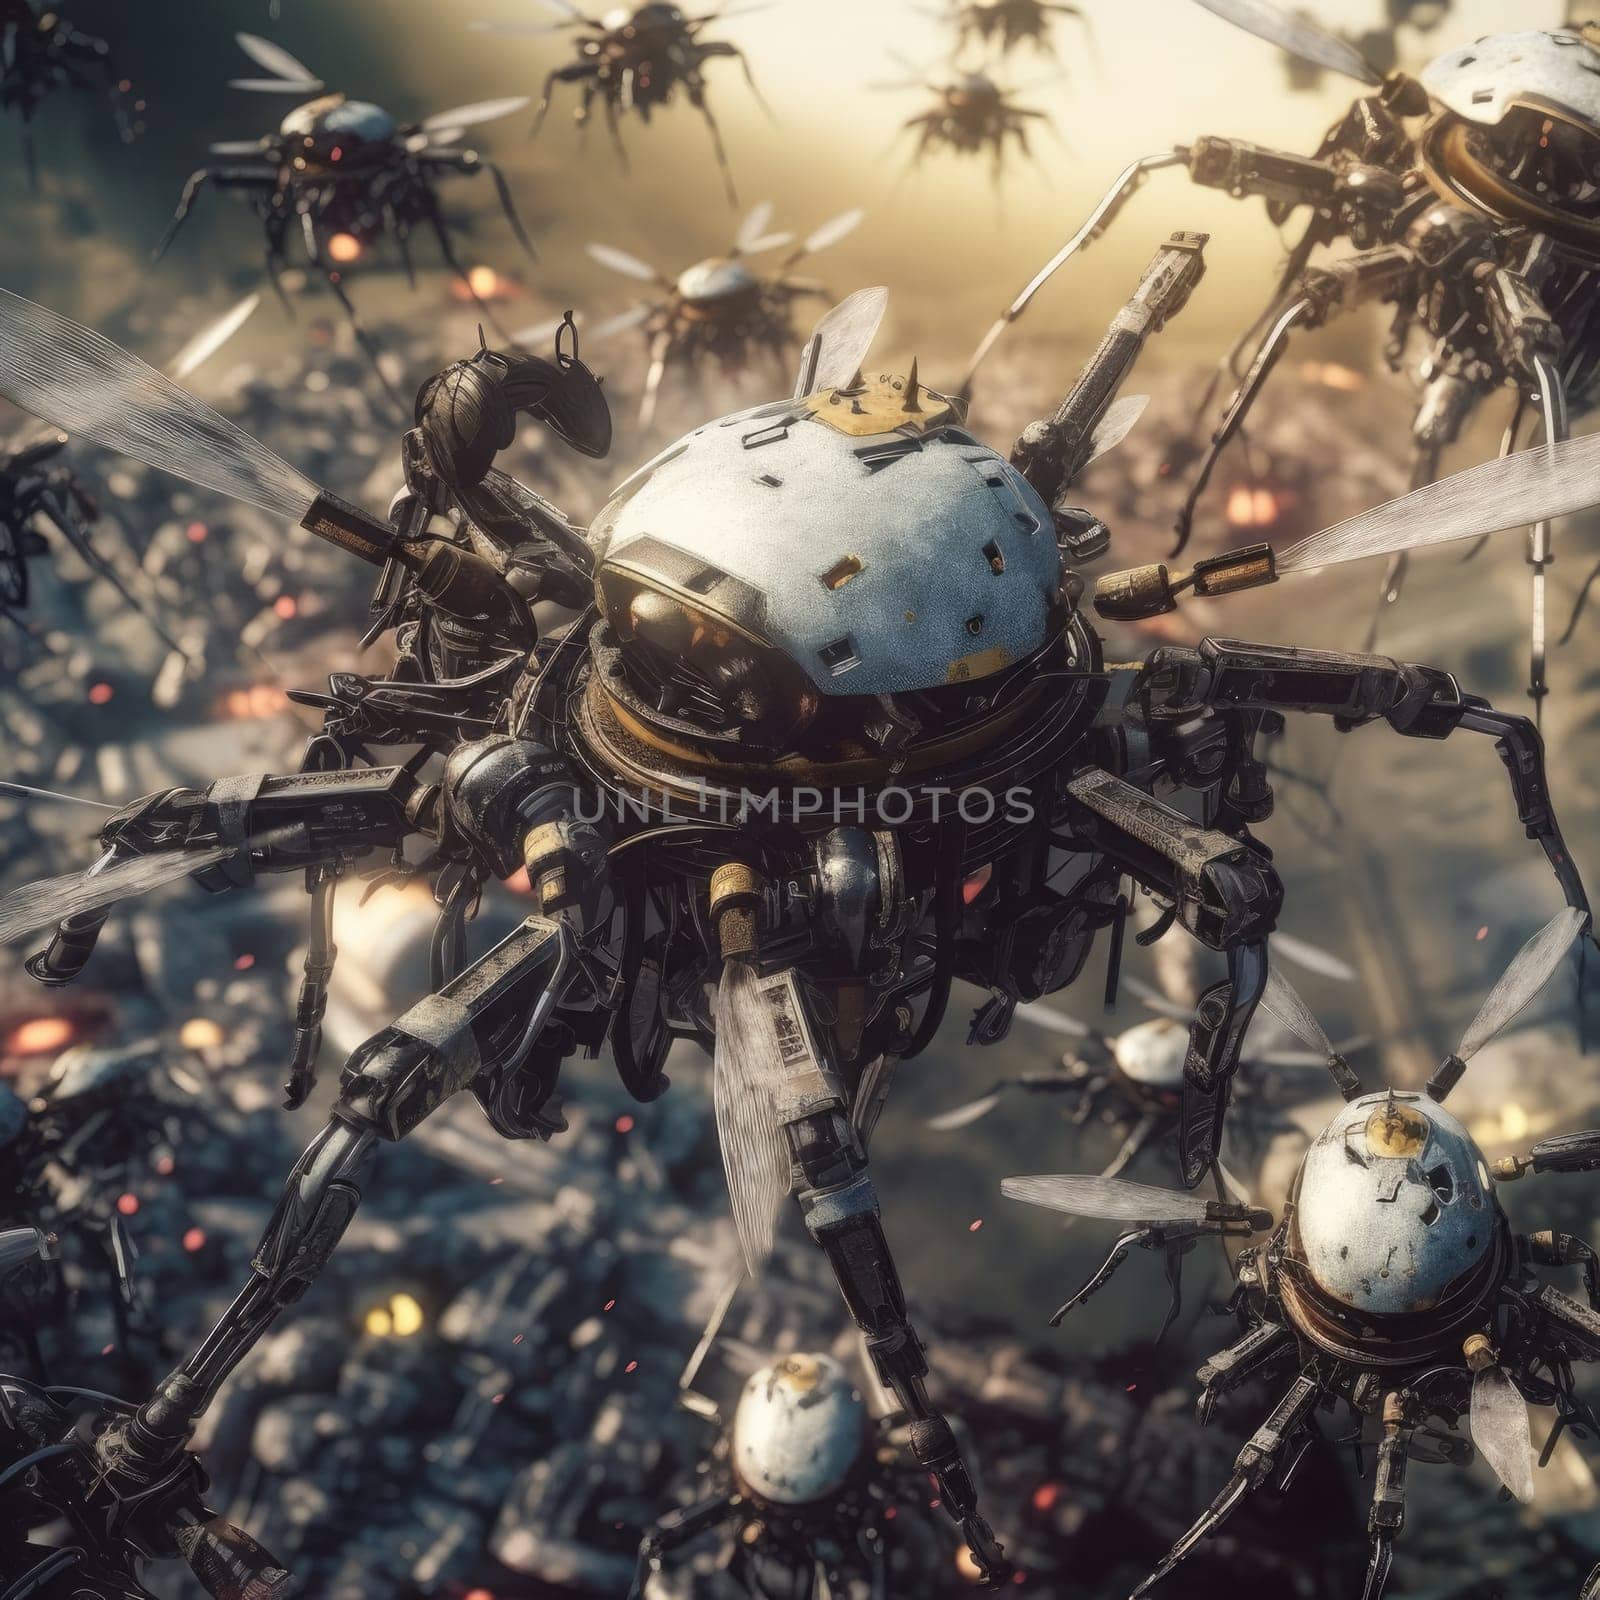 A swarm of combat robots on the battlefield